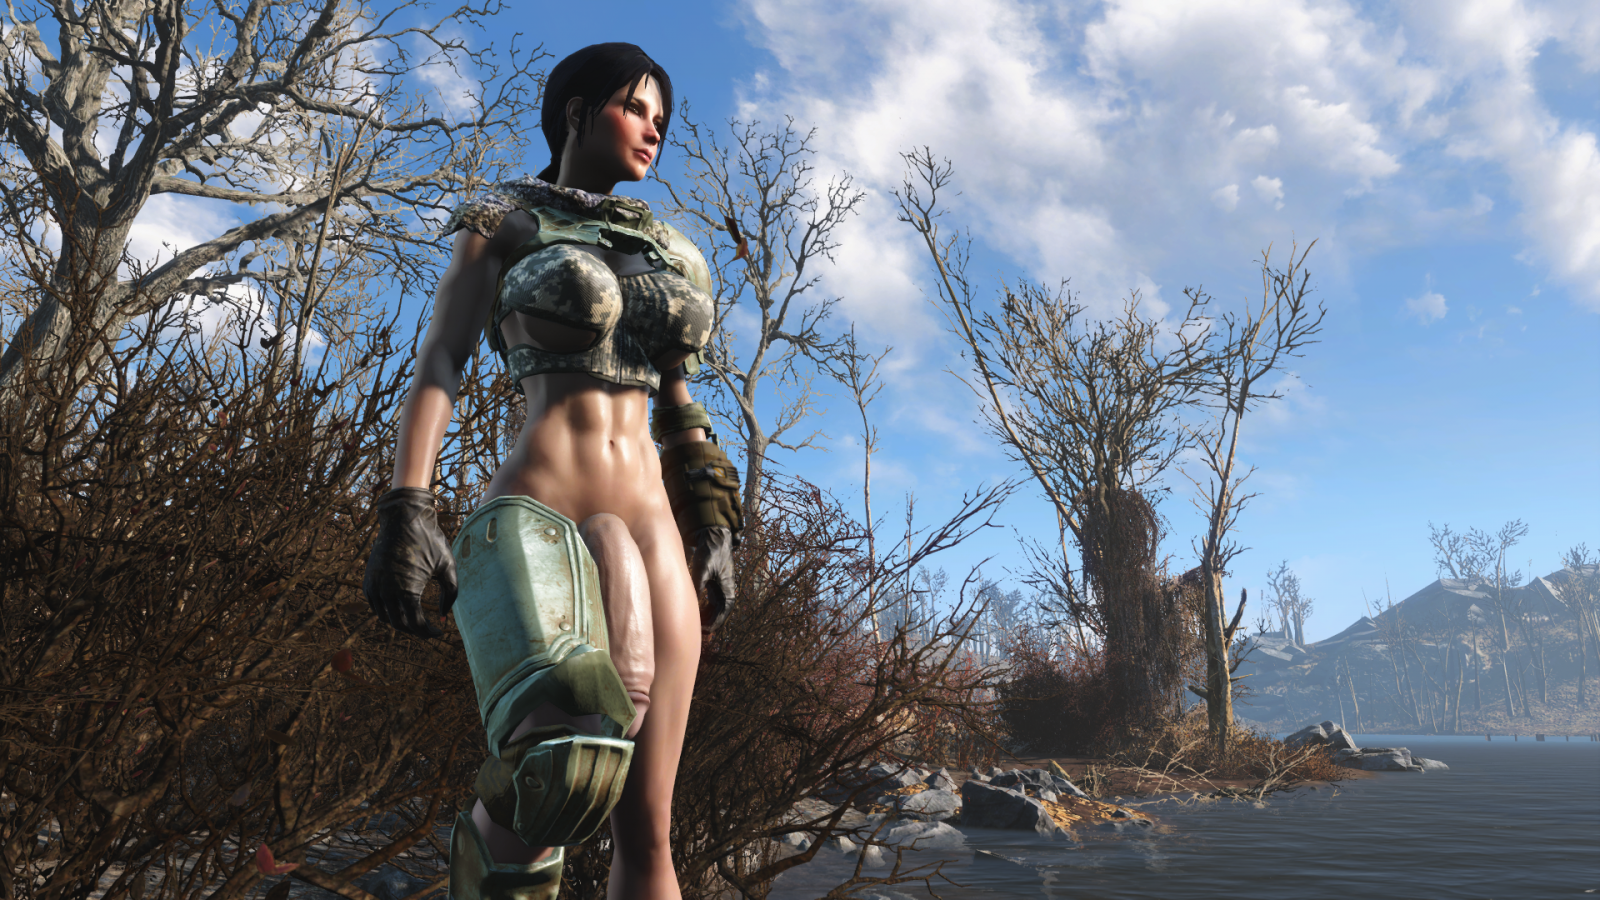 wip Futa Mod Page 5 Fallout 4 Adult Mods Loverslab is top naked photo Colle...